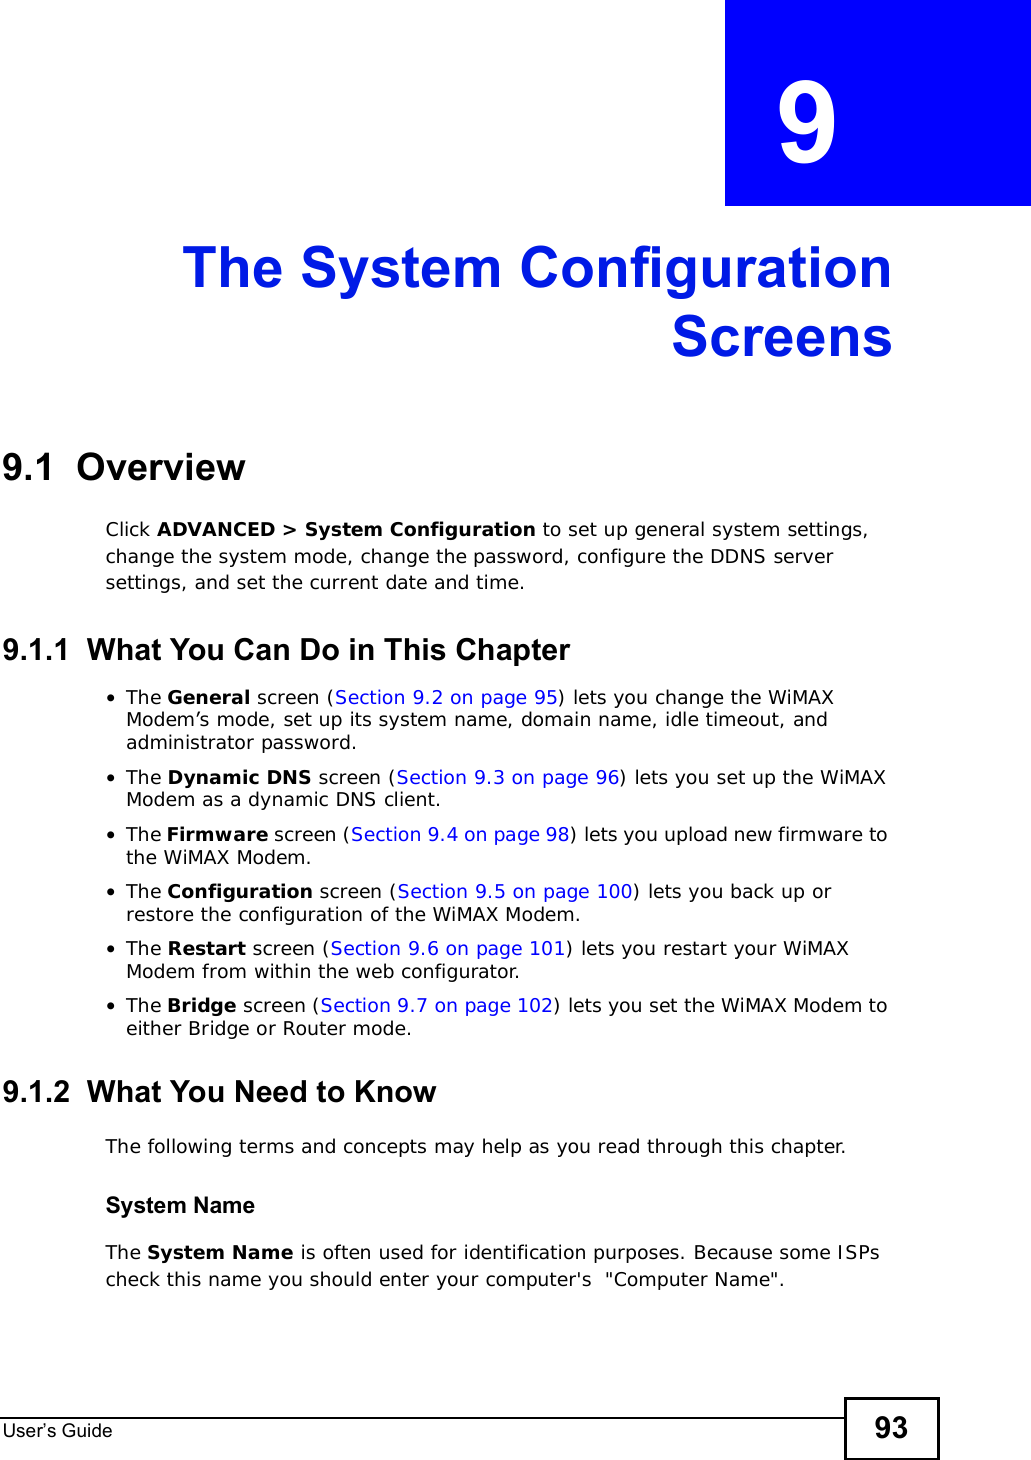 User s Guide 93CHAPTER  9 The System ConfigurationScreens9.1  OverviewClick ADVANCED &gt; System Configuration to set up general system settings, change the system mode, change the password, configure the DDNS server settings, and set the current date and time.9.1.1  What You Can Do in This Chapter•The General screen (Section 9.2 on page 95) lets you change the WiMAX Modem’s mode, set up its system name, domain name, idle timeout, and administrator password.•The Dynamic DNS screen (Section 9.3 on page 96) lets you set up the WiMAX Modem as a dynamic DNS client.•The Firmware screen (Section 9.4 on page 98) lets you upload new firmware to the WiMAX Modem.•The Configuration screen (Section 9.5 on page 100) lets you back up or restore the configuration of the WiMAX Modem.•The Restart screen (Section 9.6 on page 101) lets you restart your WiMAX Modem from within the web configurator.•The Bridge screen (Section 9.7 on page 102) lets you set the WiMAX Modem to either Bridge or Router mode.9.1.2  What You Need to KnowThe following terms and concepts may help as you read through this chapter.System NameThe System Name is often used for identification purposes. Because some ISPs check this name you should enter your computer&apos;s  &quot;Computer Name&quot;. 